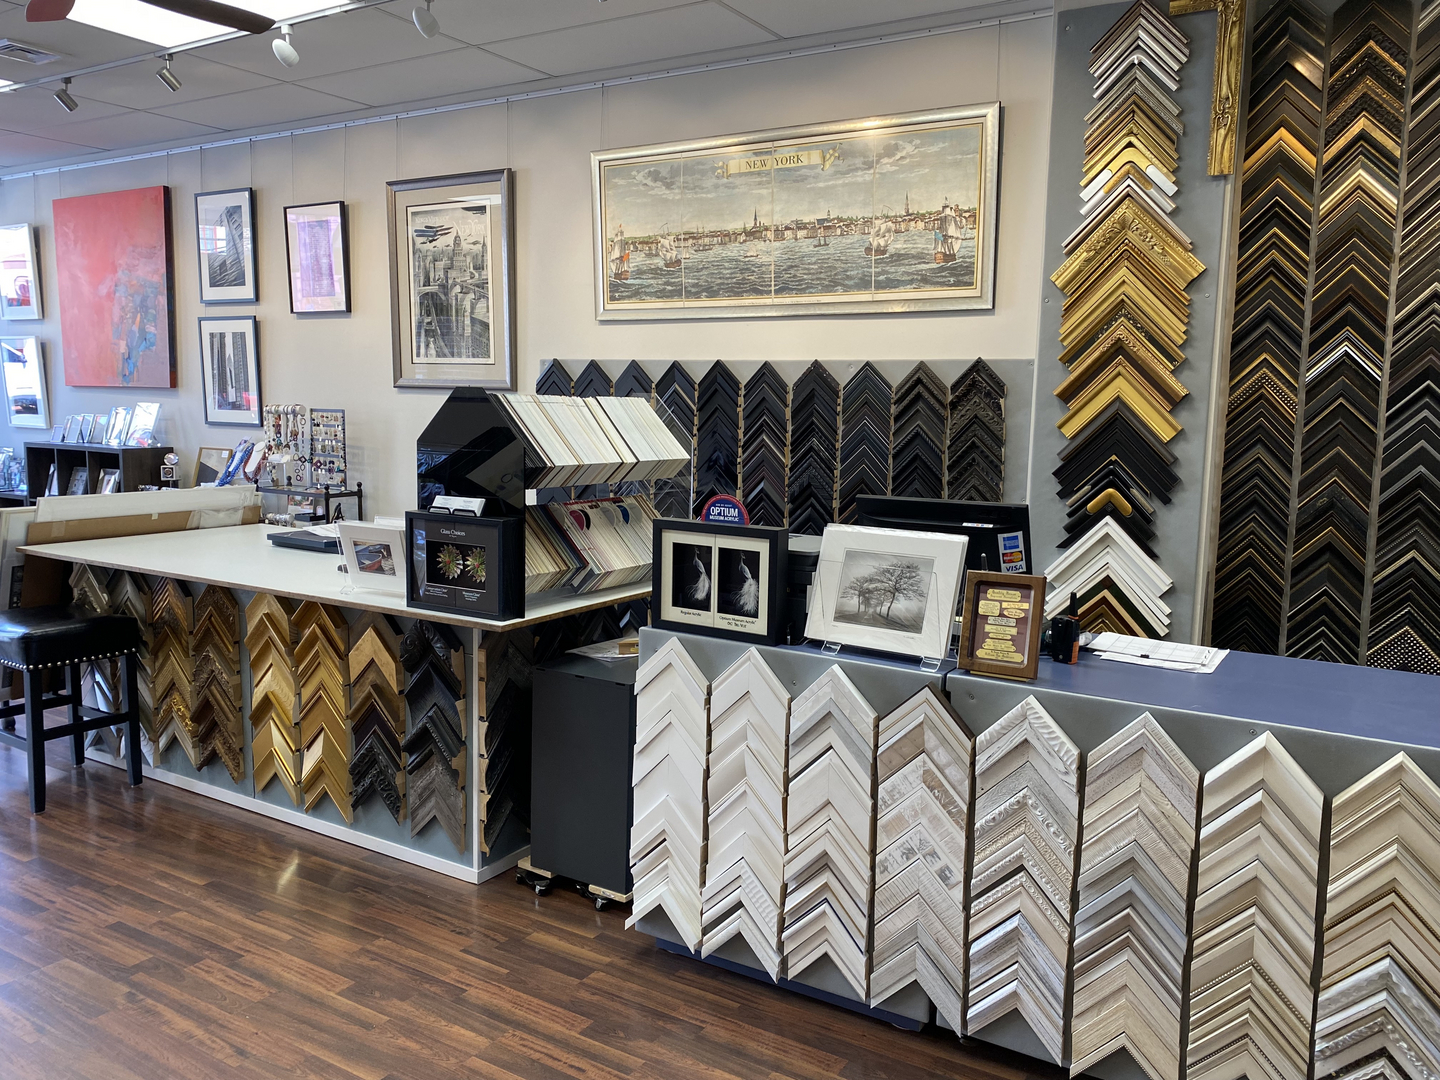 Custom Picture Framing Online & In Retail Stores